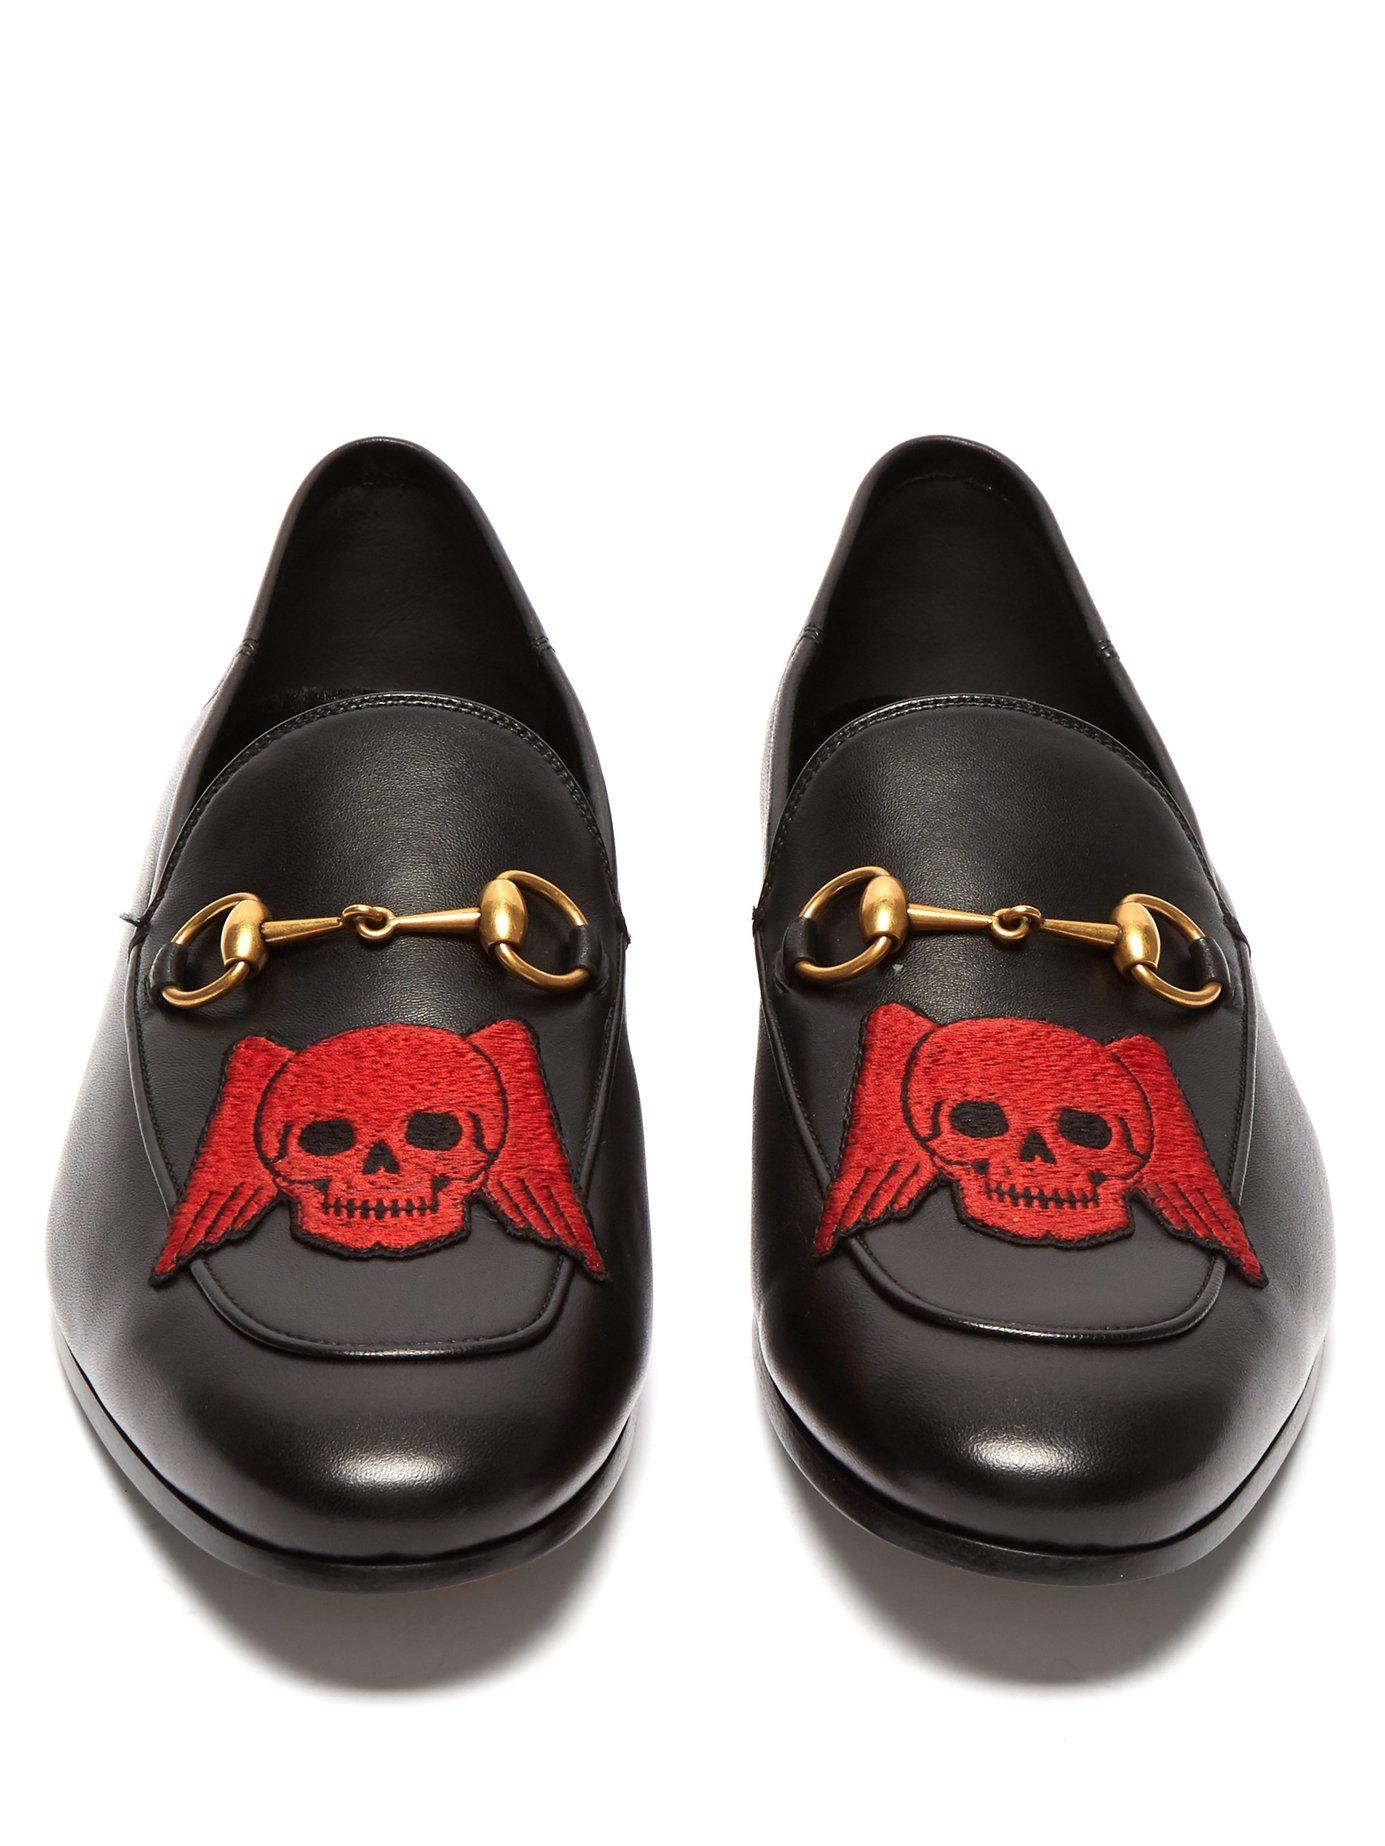 Gucci Brixton Skull Leather Loafers in 